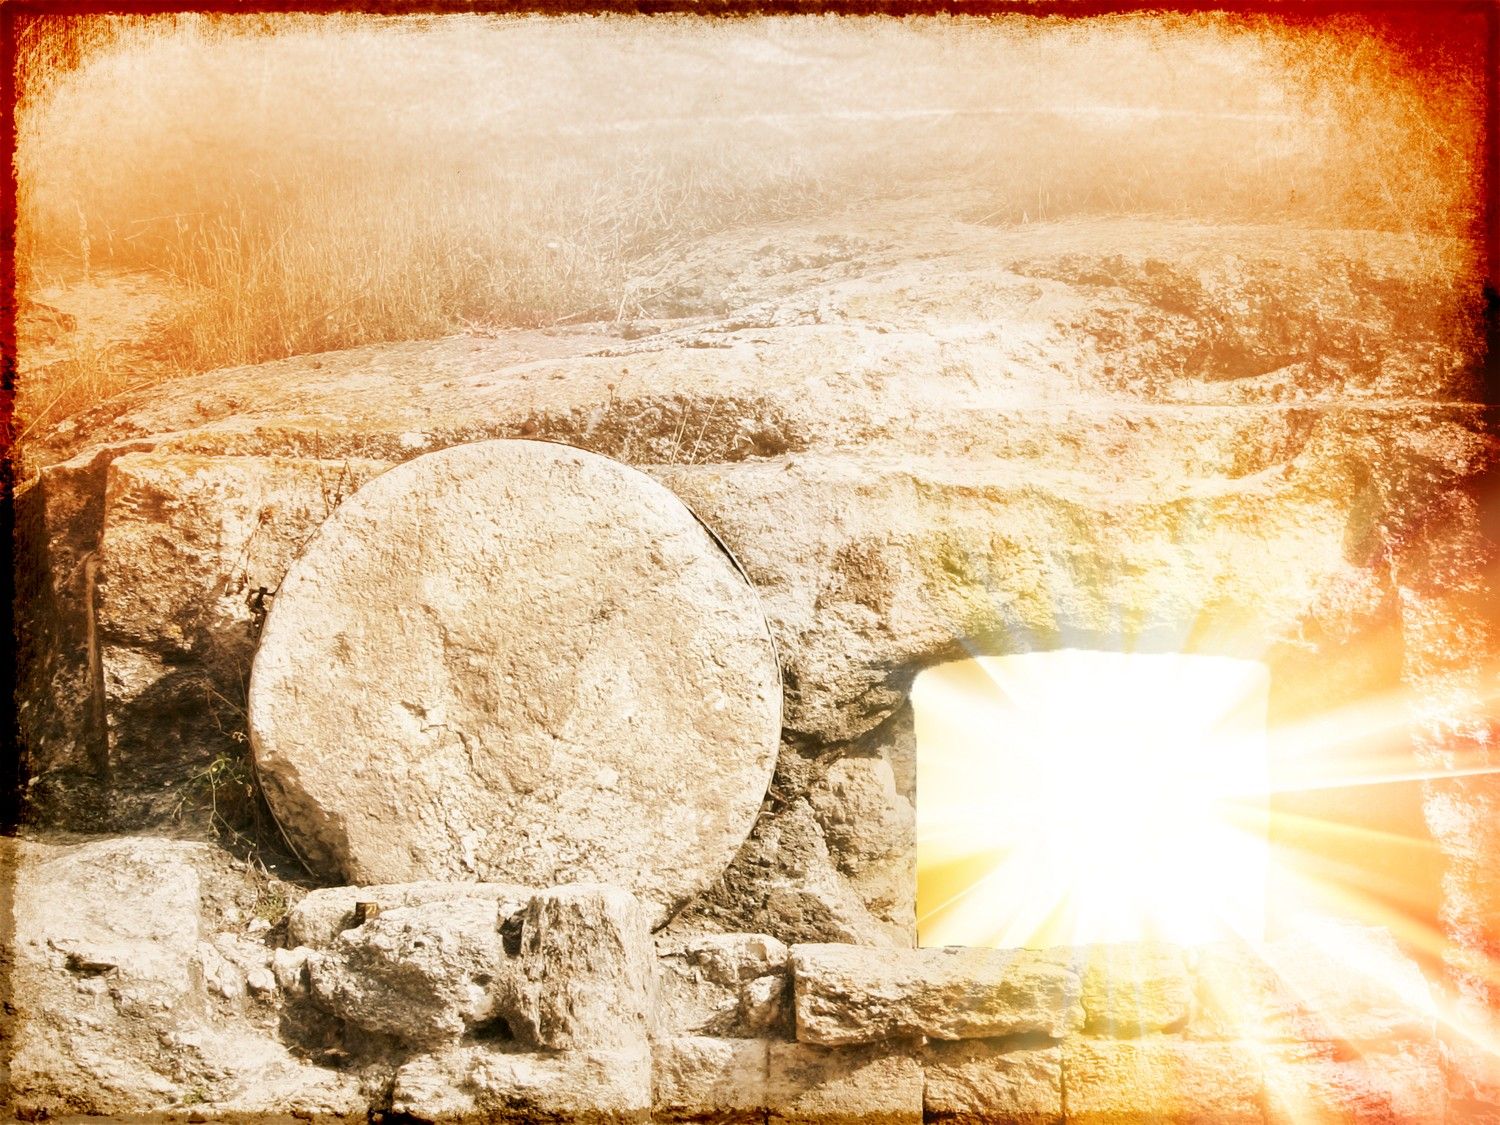 Happy Easter Wishes Resurrection Jesus Alive Risen From Dead Empty